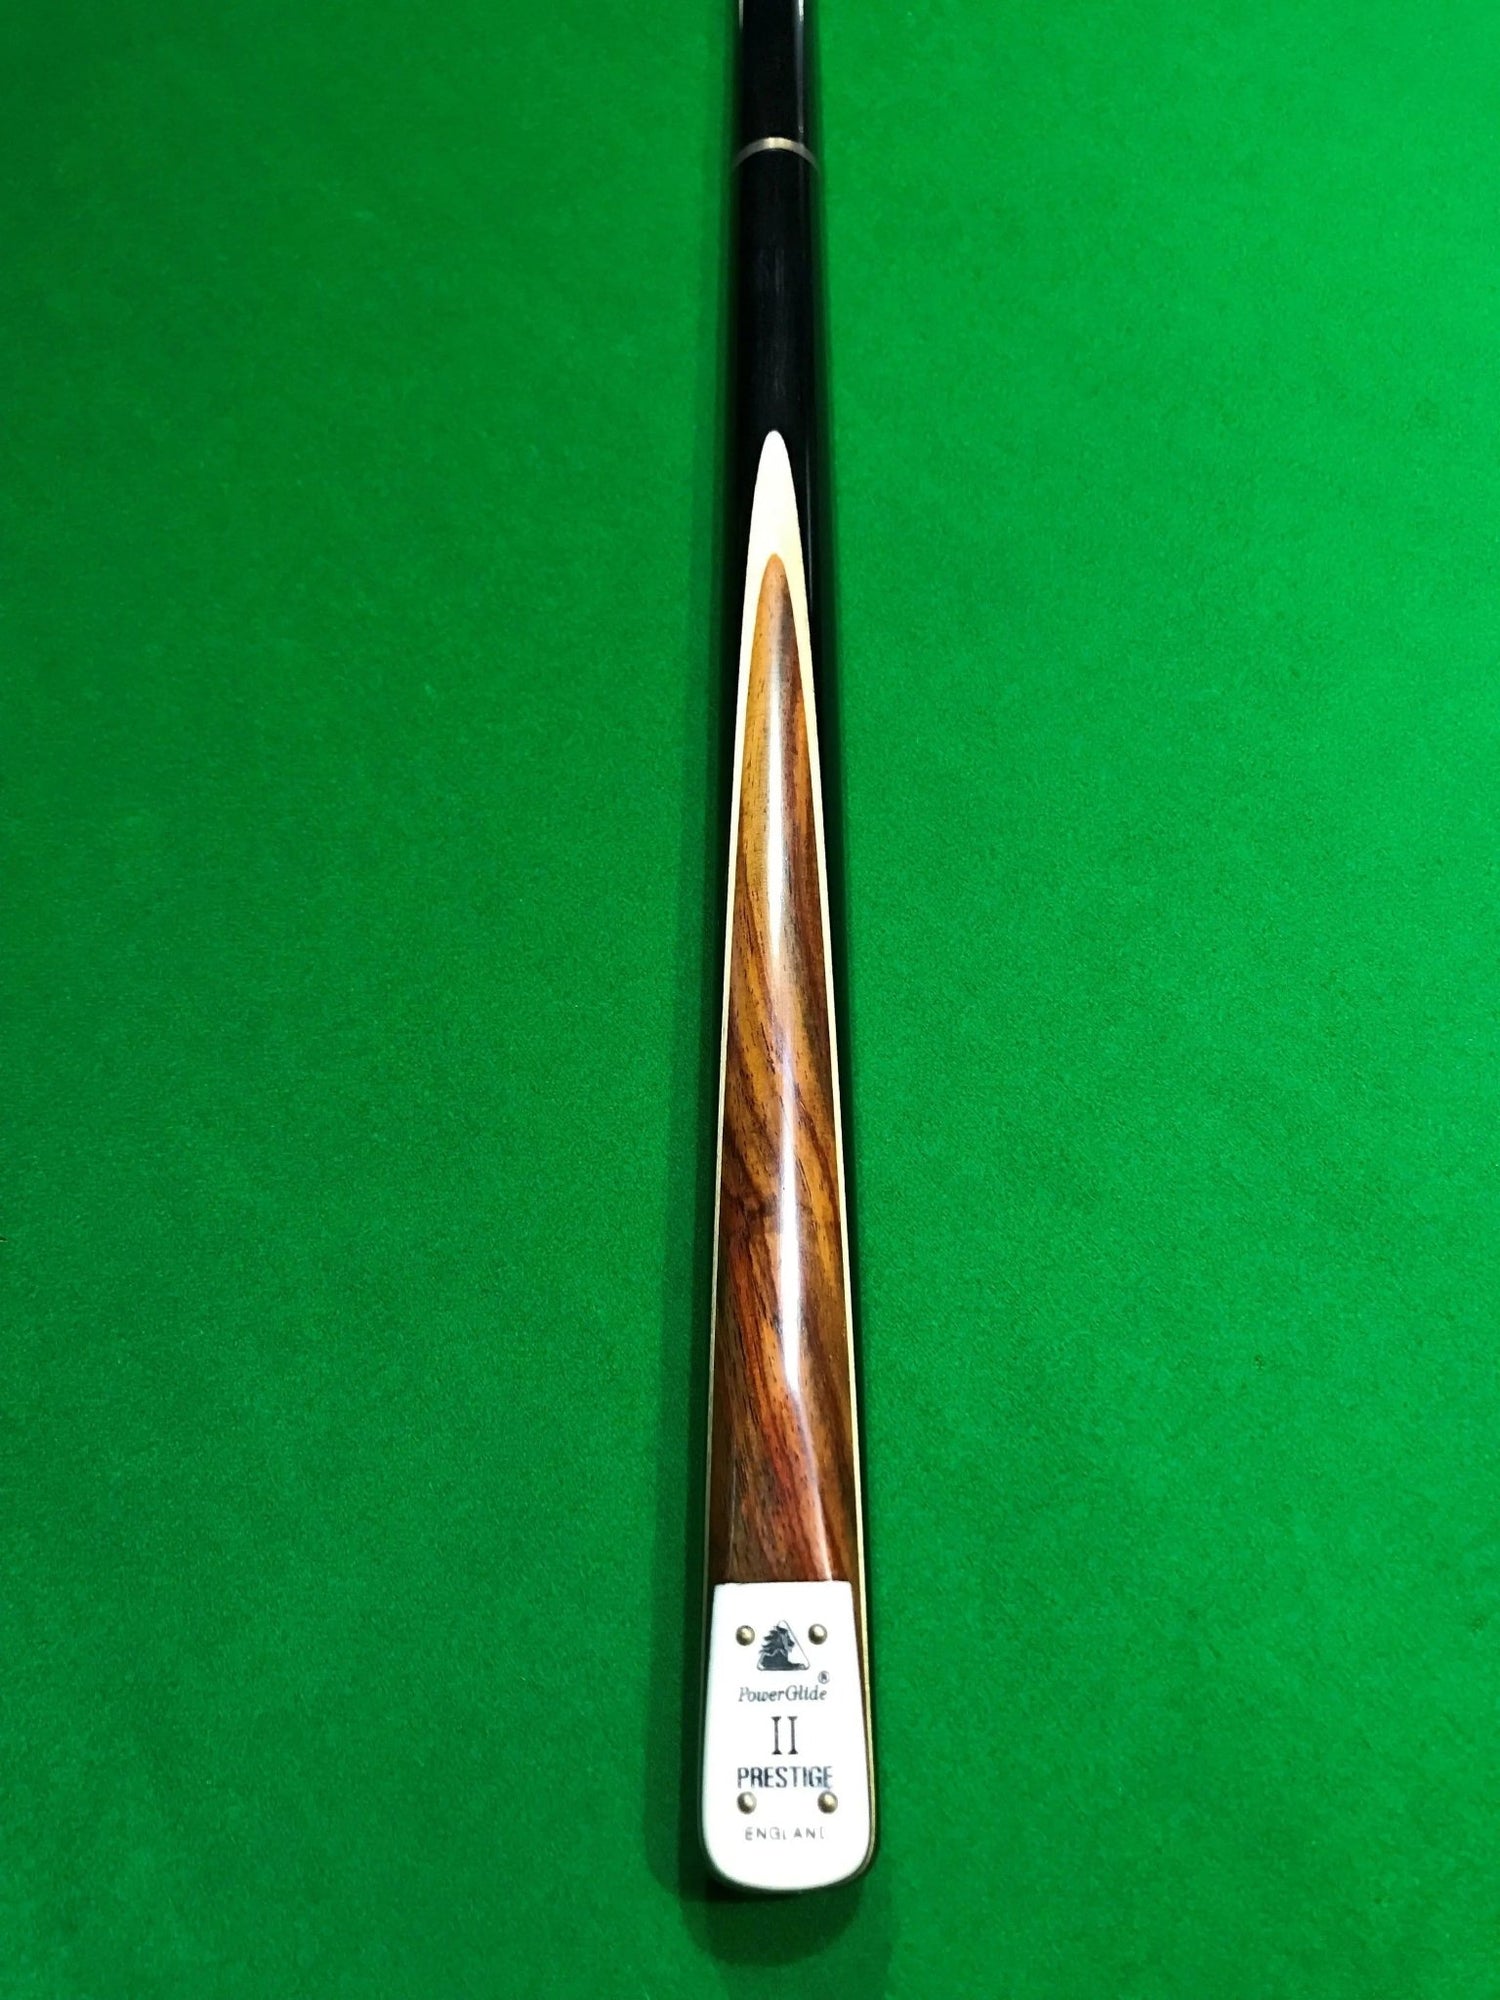 POWERGLIDE Prestige II Hand Made 3/4 Pool, Snooker & Billiard Ash Cue with Butt Extension - Q-Masters